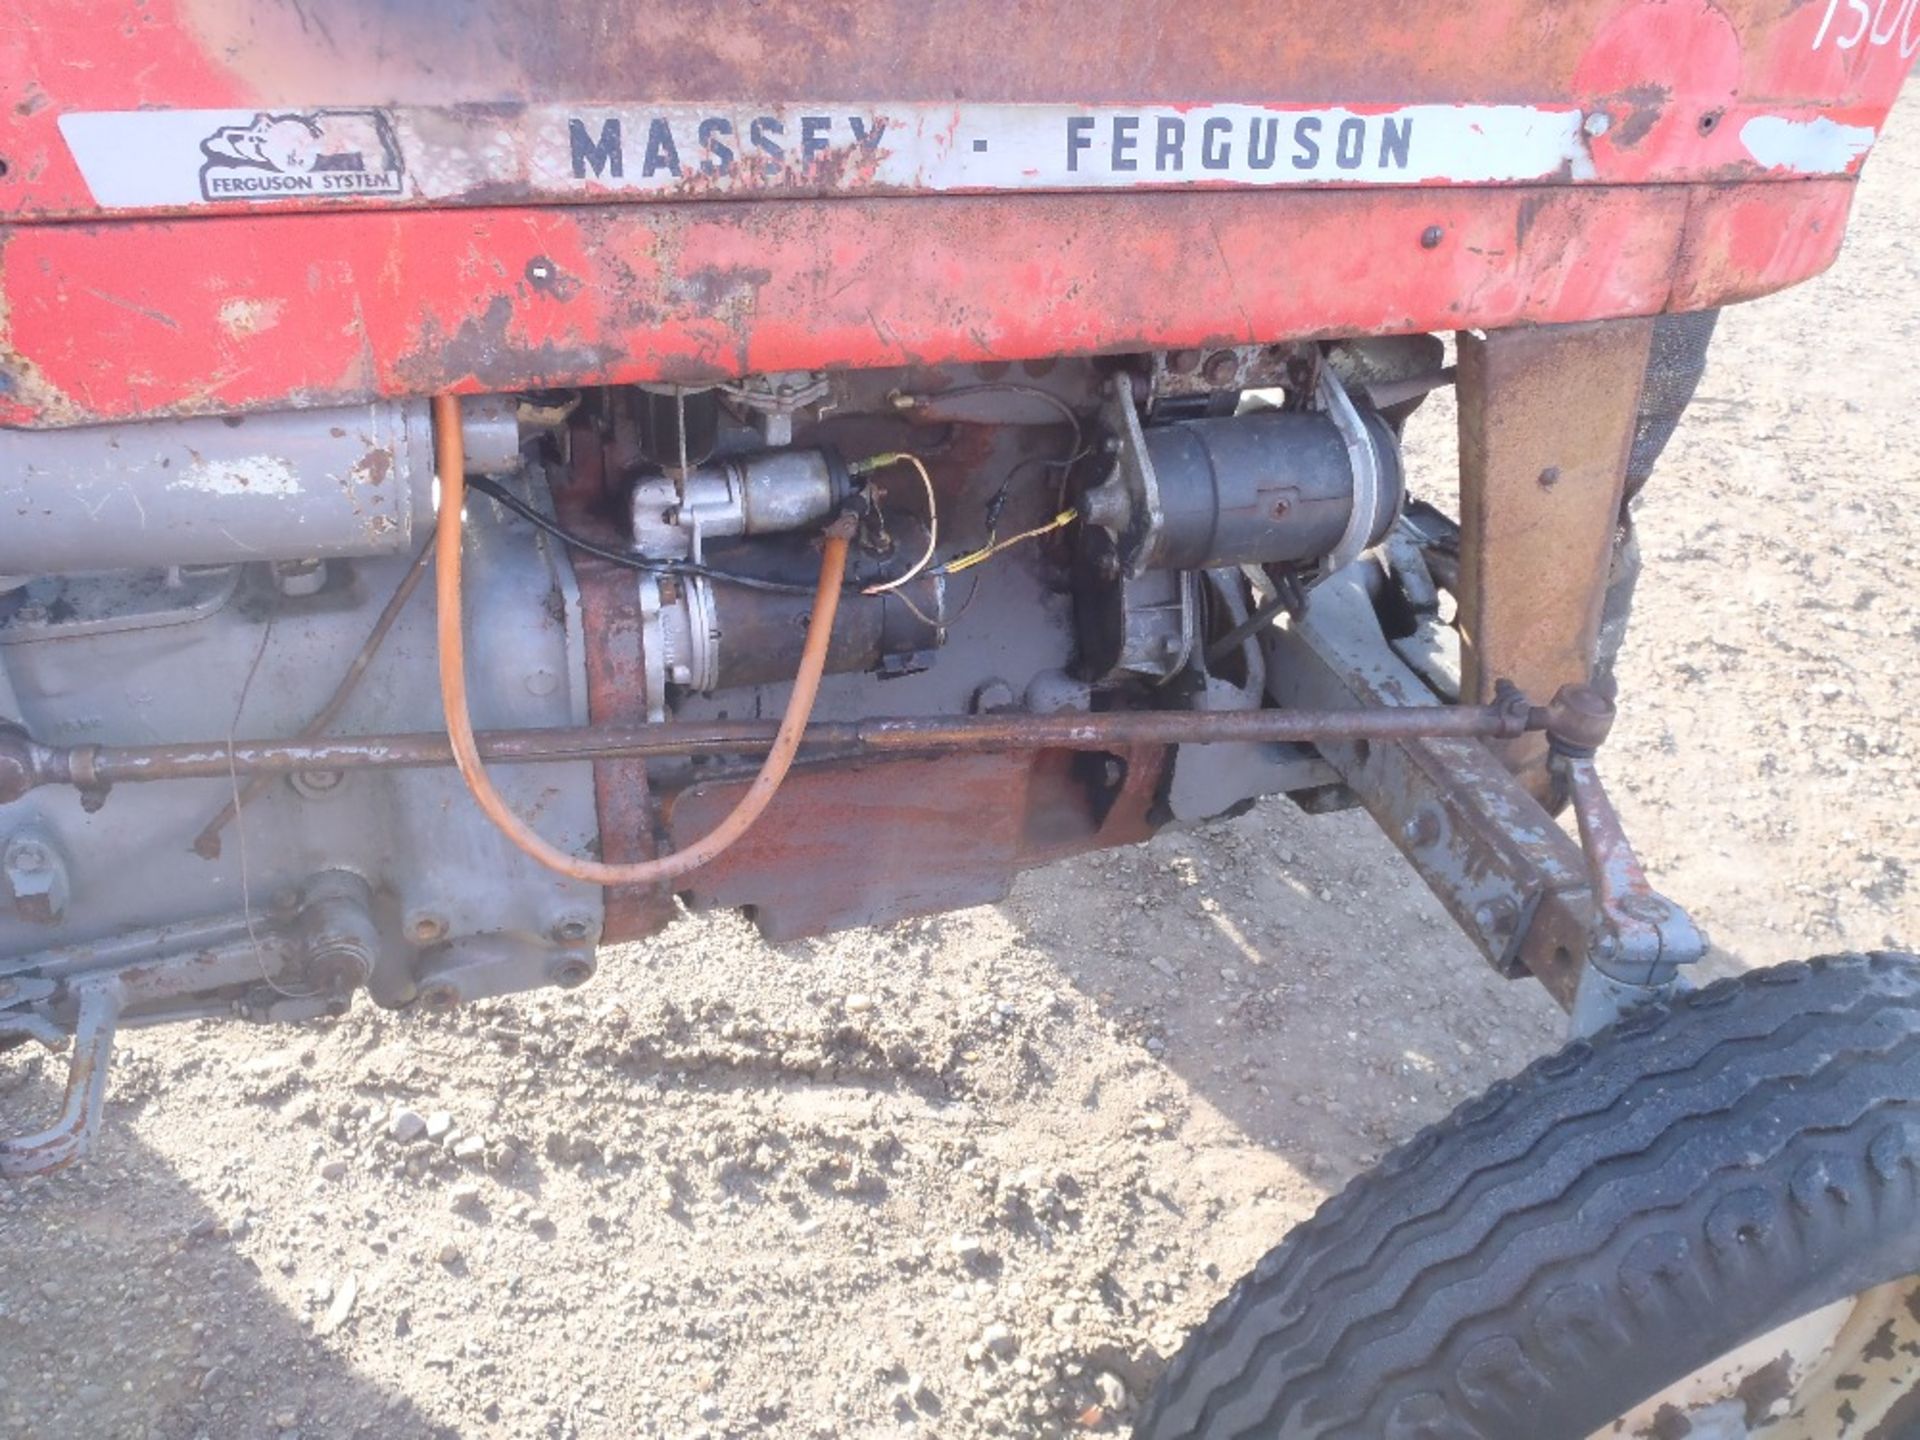 Massey Ferguson 135 Tractor with Long PTO Ser. No. 490675 - Image 5 of 8